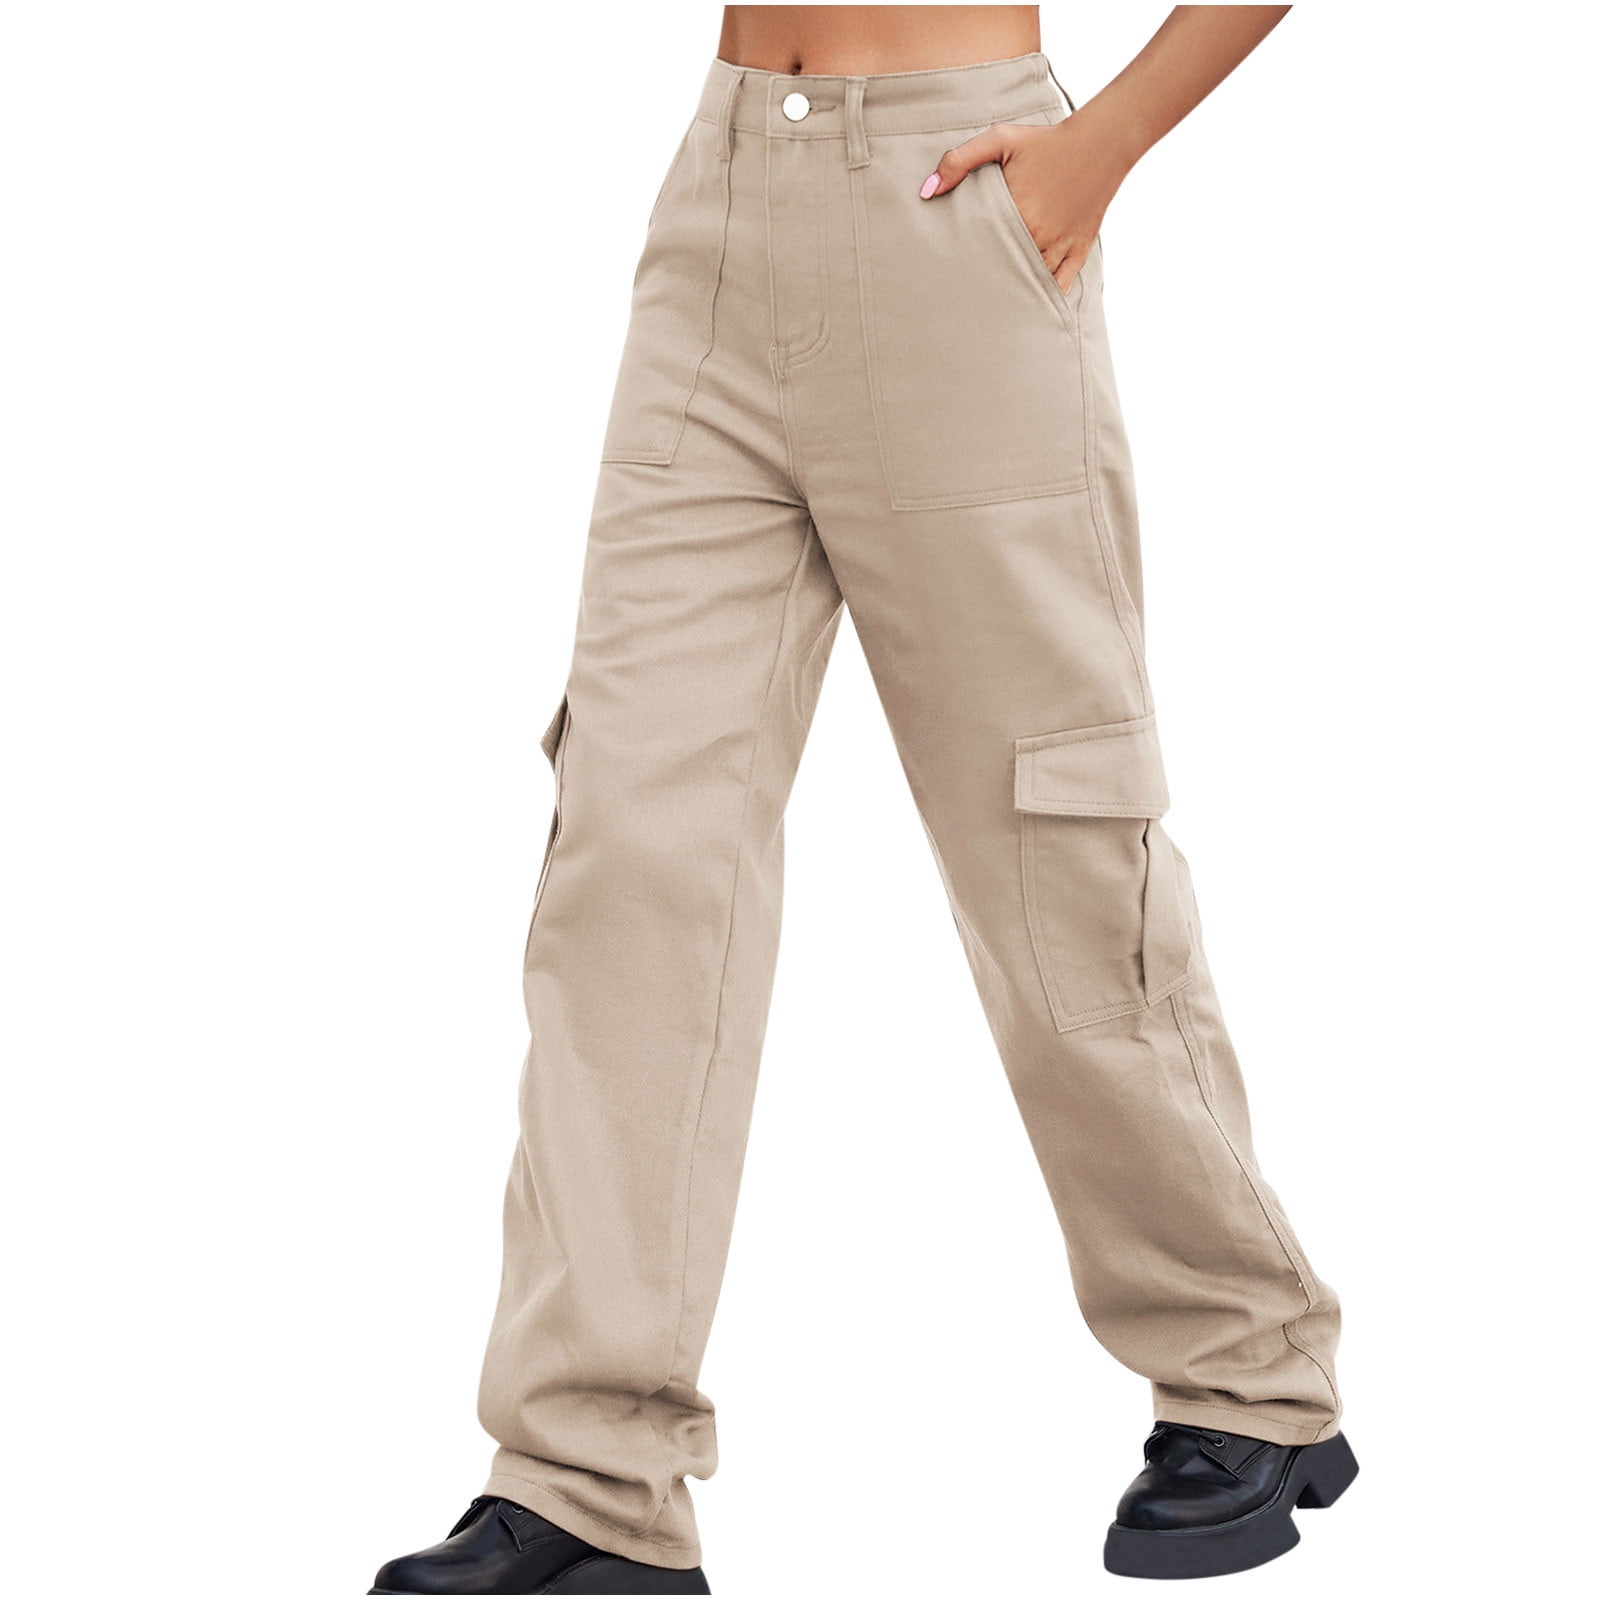 Jeans & Trousers  Belly Fat Hider Elastic Pants Fully Streachable